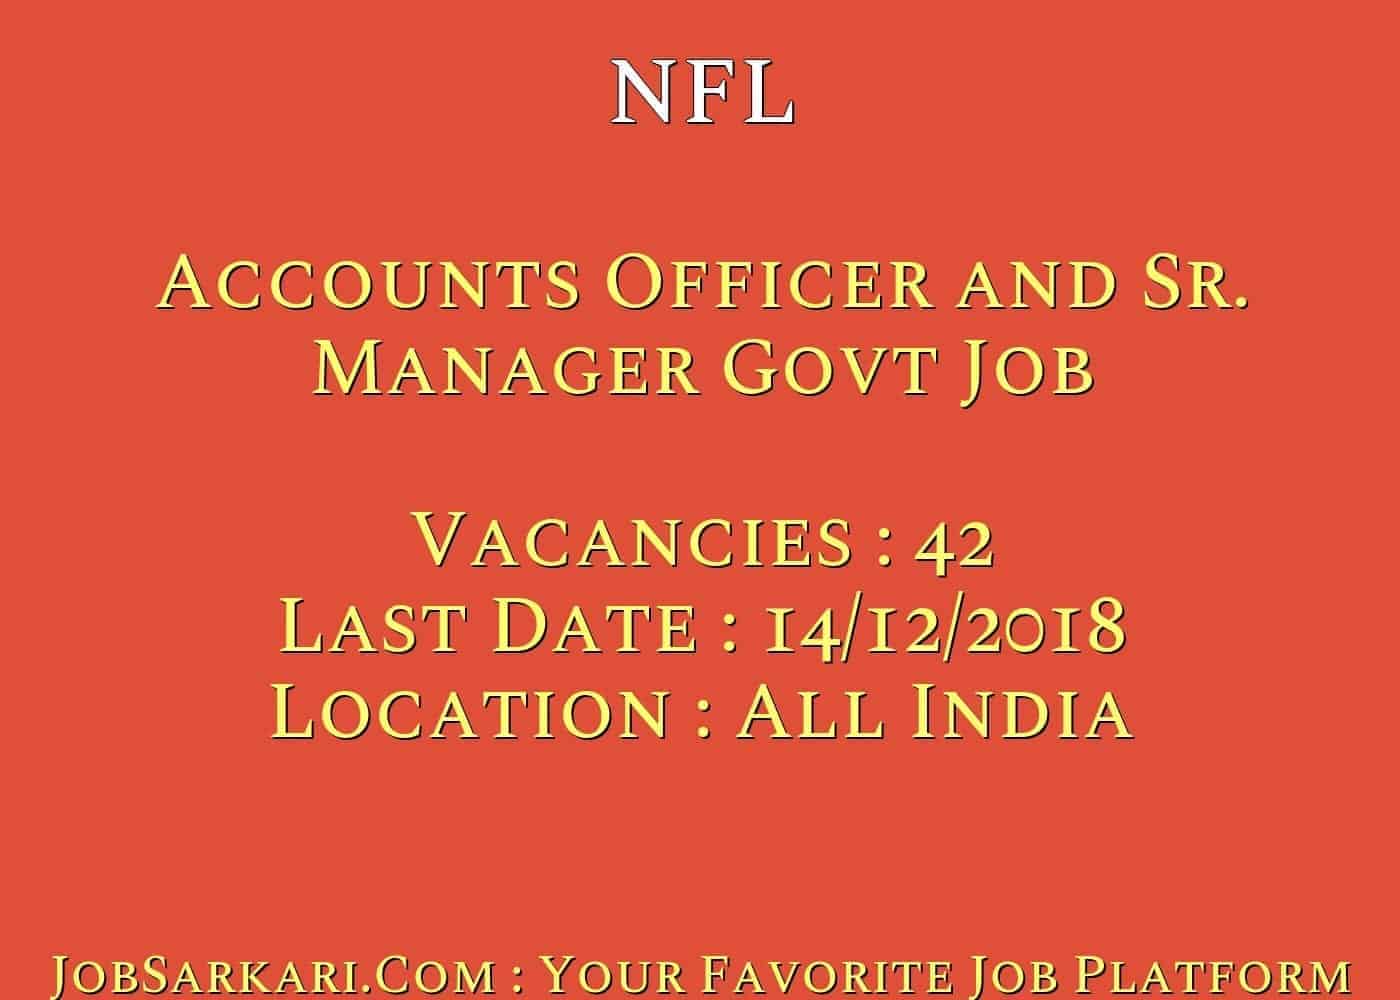 NFL Recruitment 2018 for Accounts Officer and Sr. Manager Govt Job